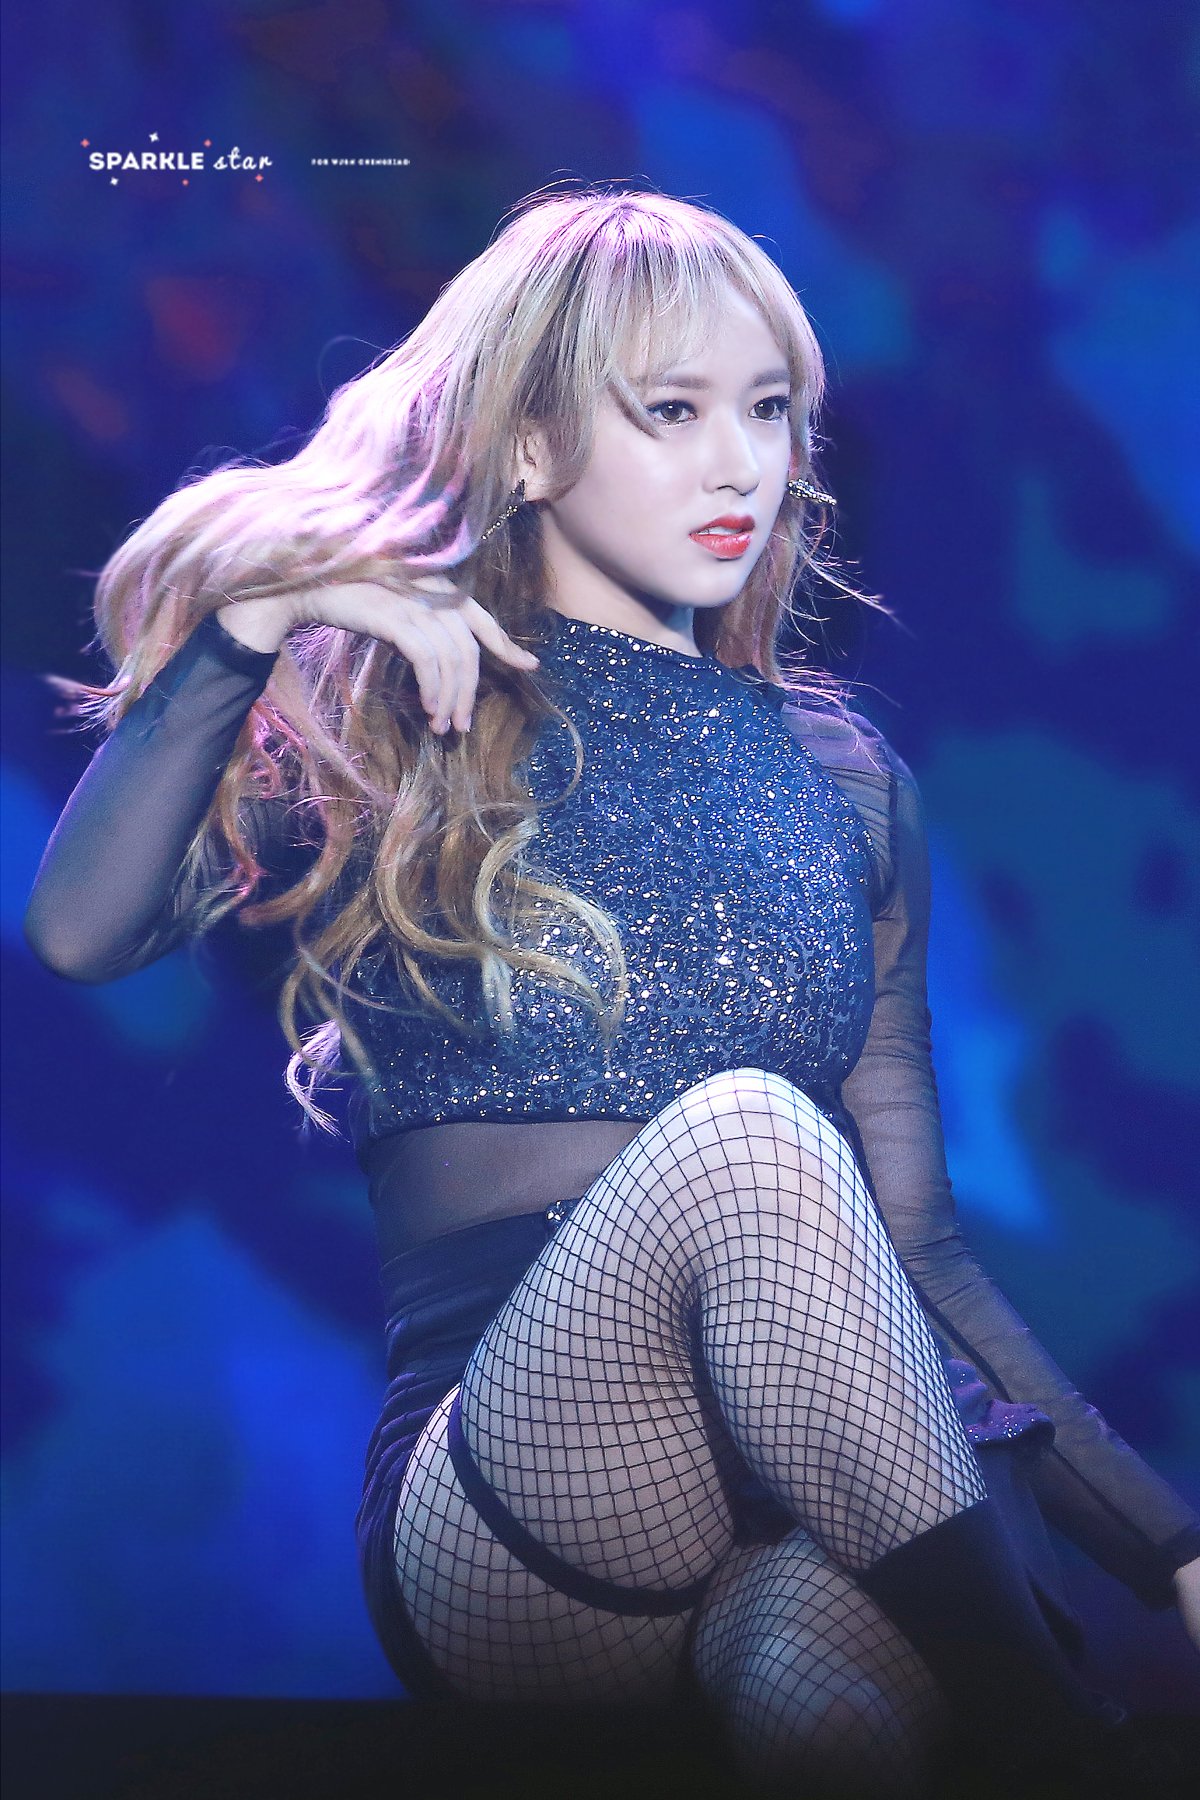 cheng xiao pics on Twitter.